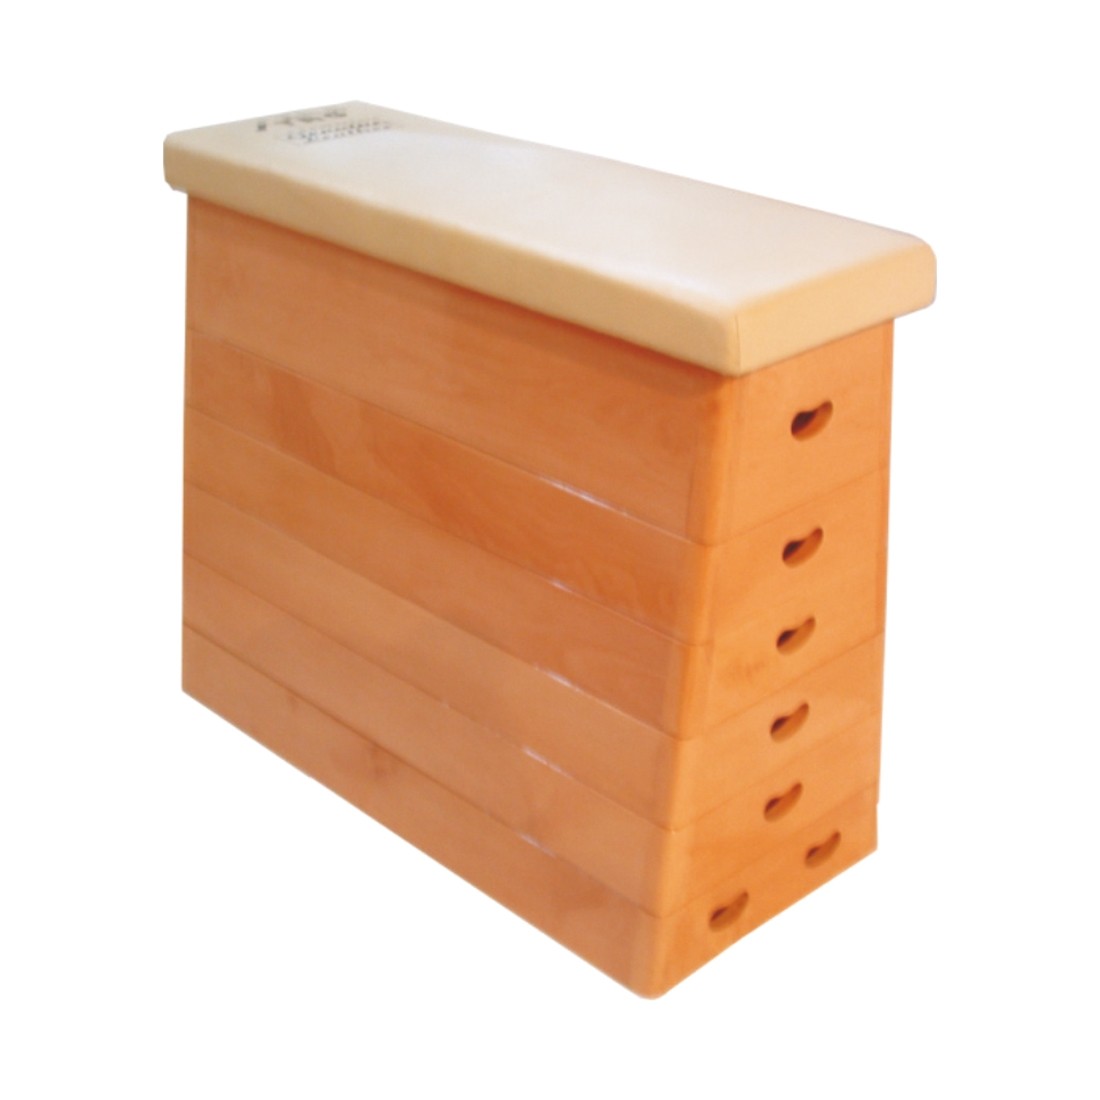 STAG VAULTING BOX ( WOODEN )  HIGH QUALITY BEACH WOOD